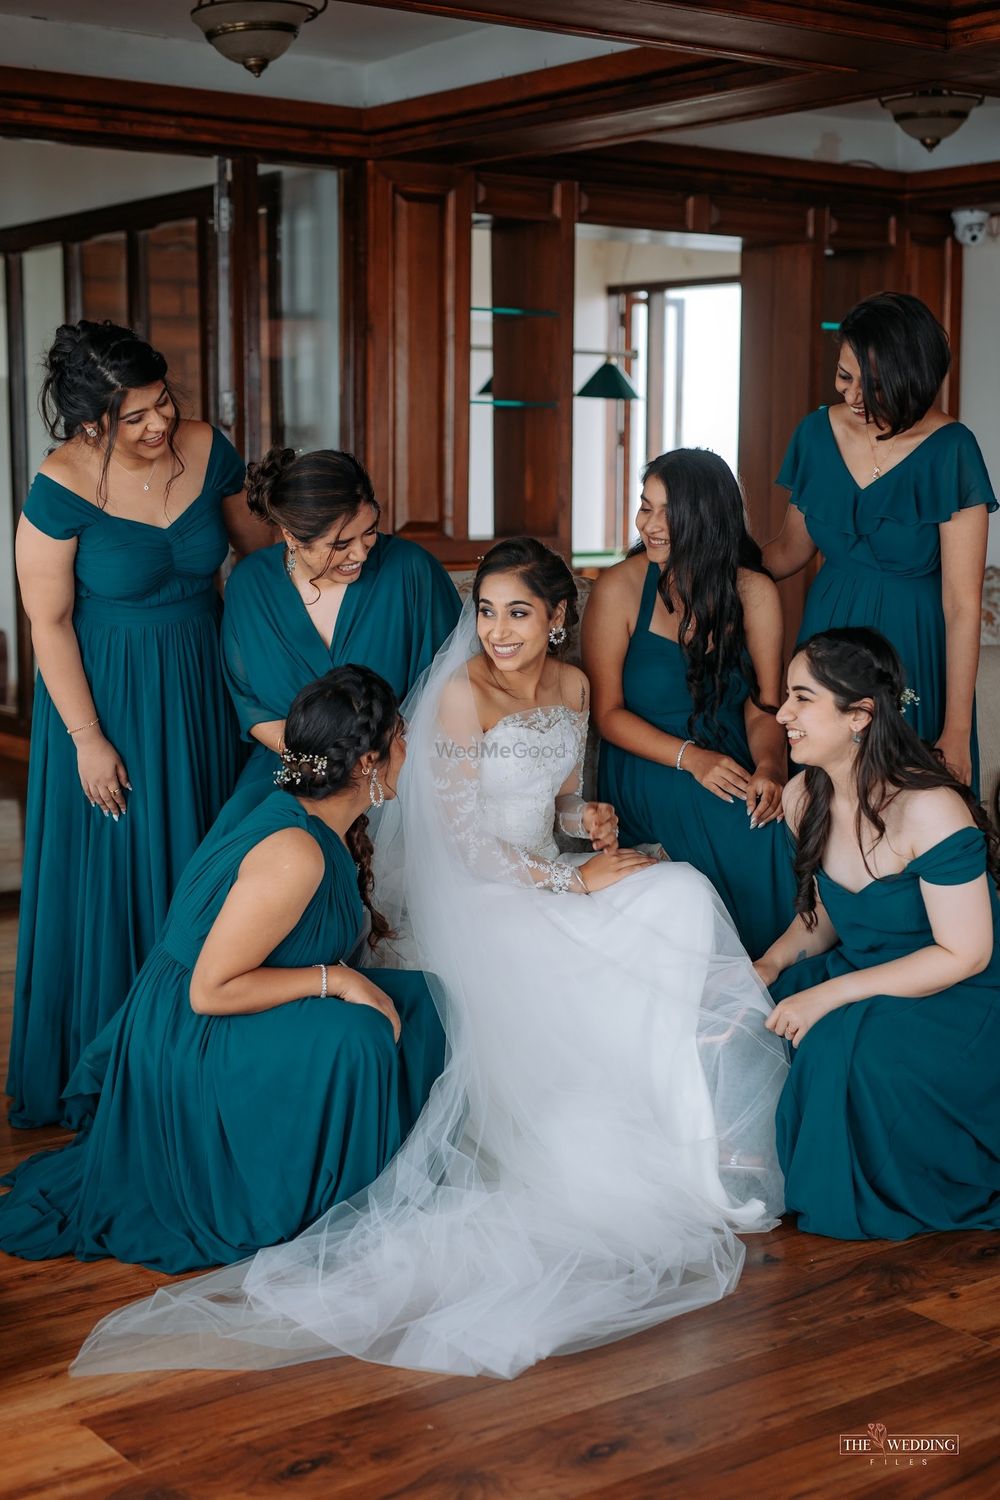 Photo From Heena and Her Bridal Party  - By Minsen Beauty Parlour